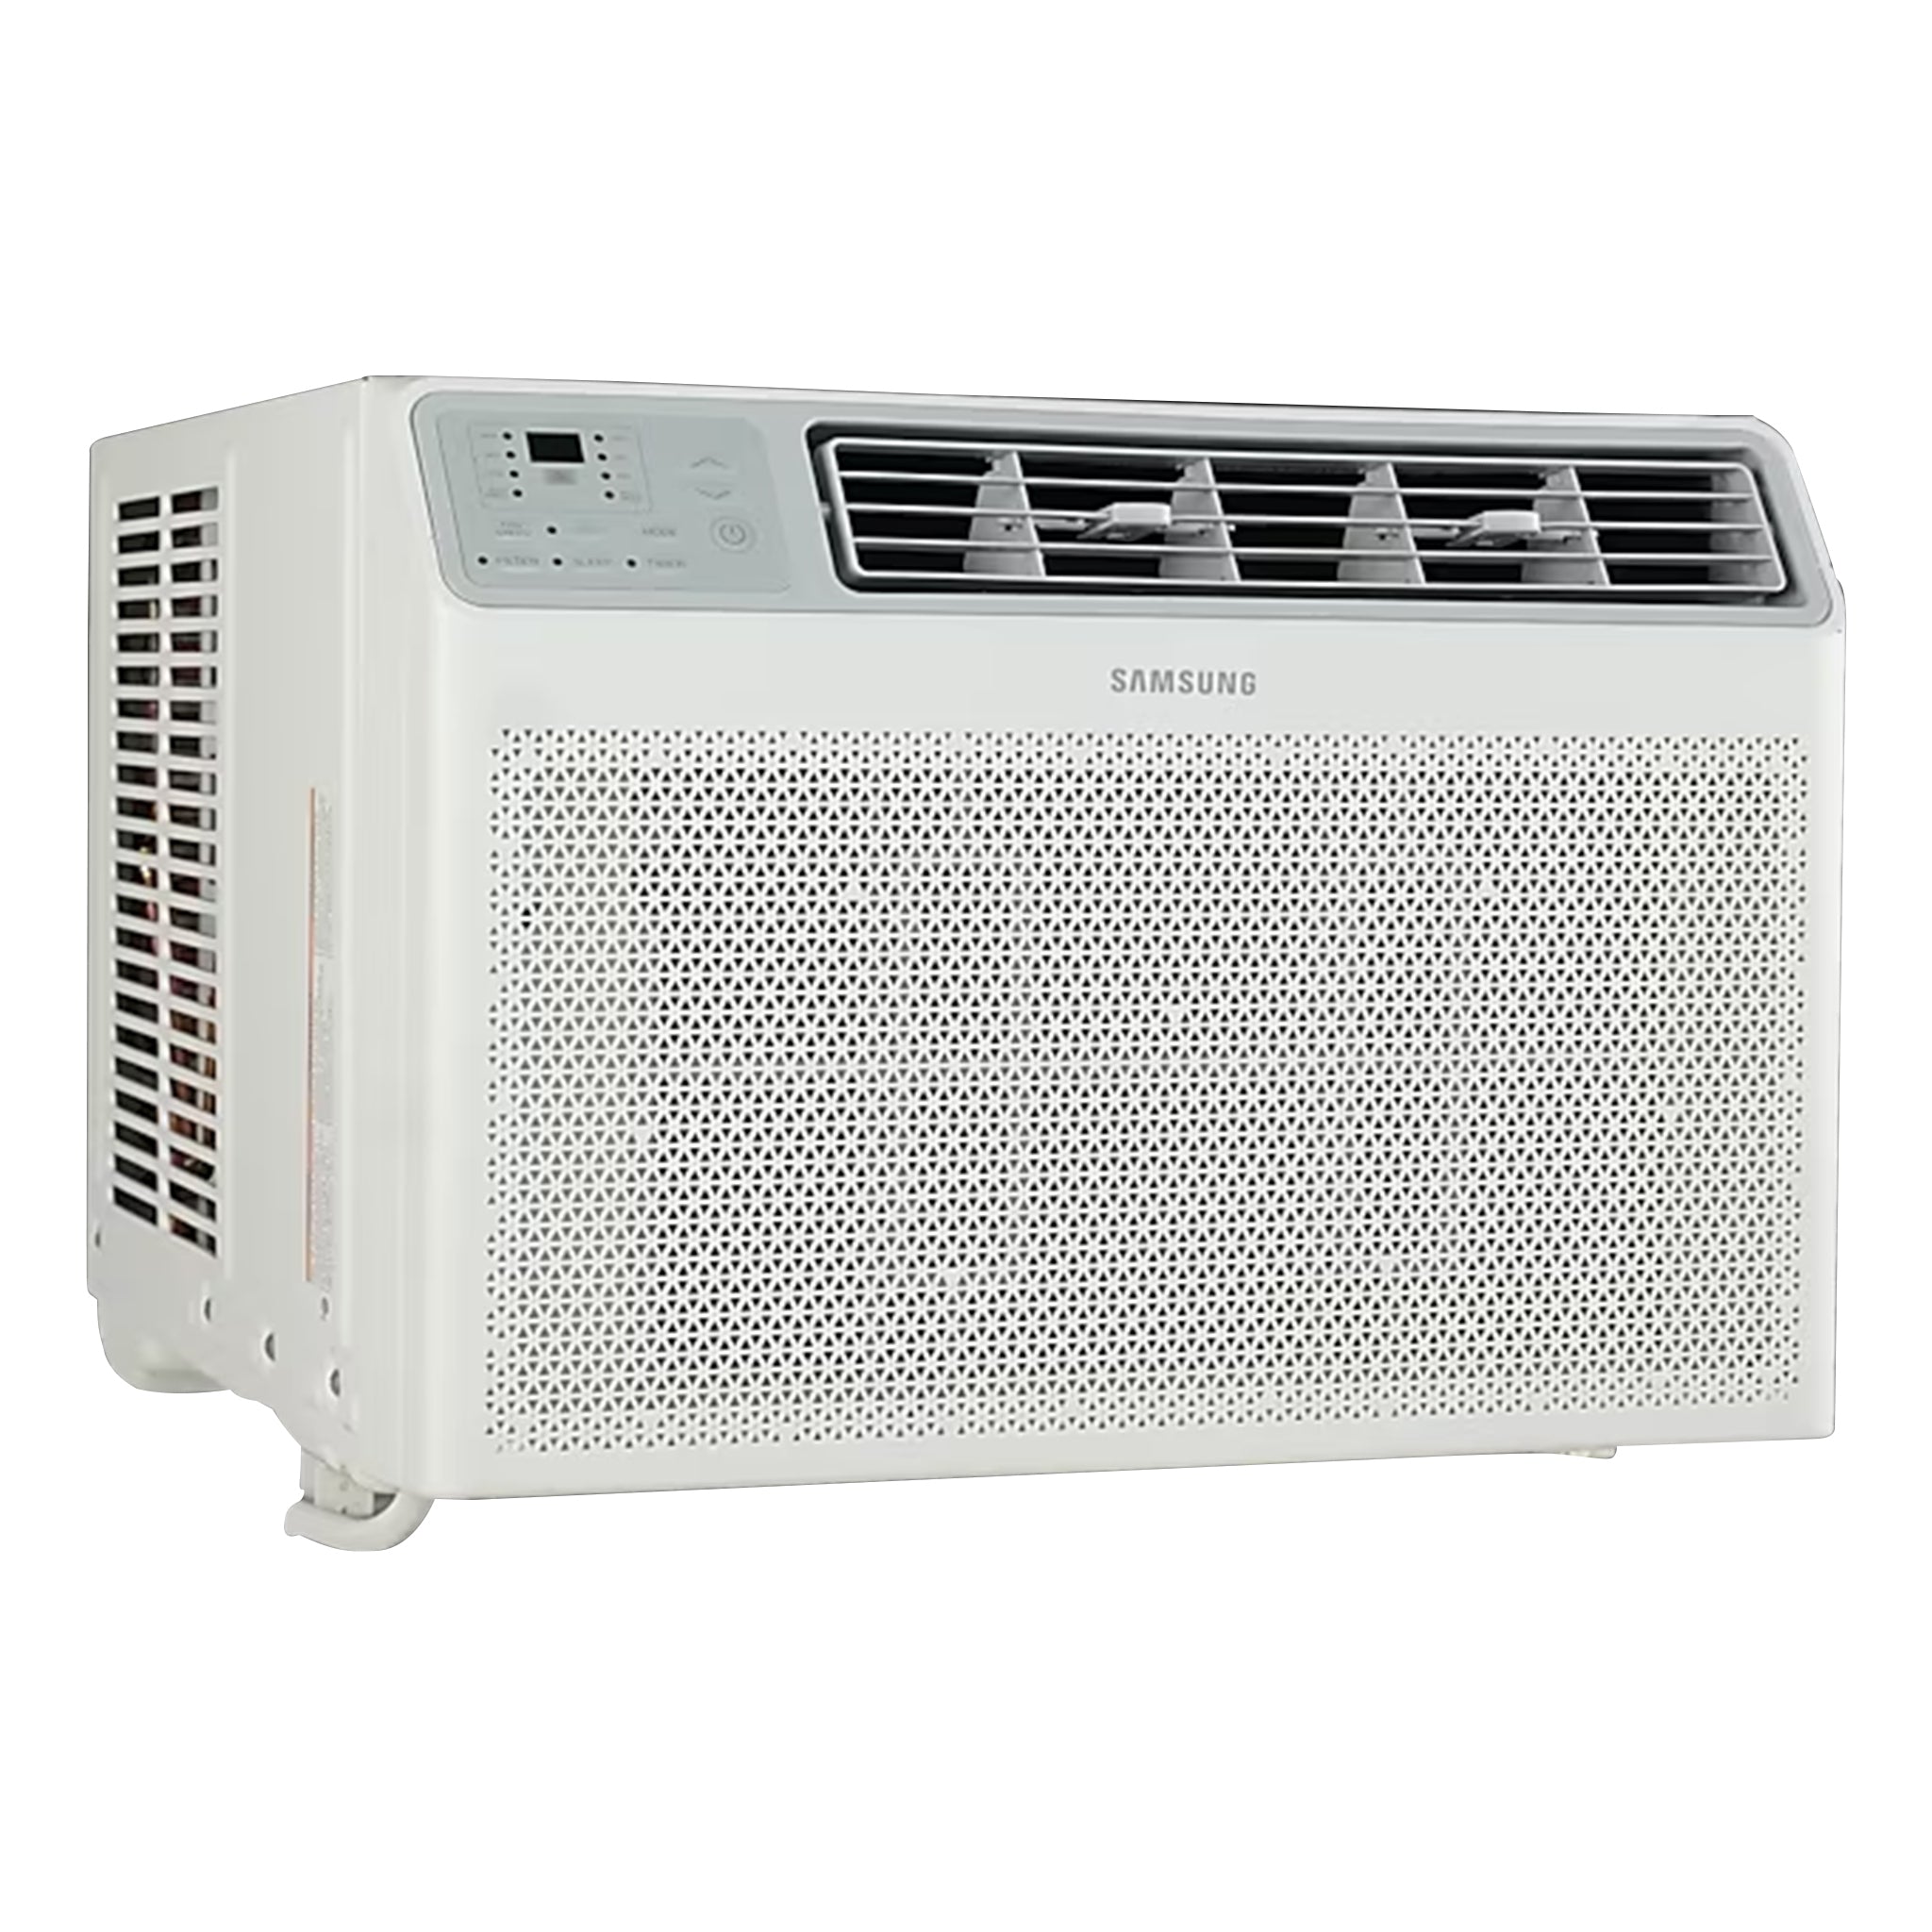 SAMSUNG AW07CGHLAWKNTC 0.75HP Window-type Compact Air Conditioner Samsung